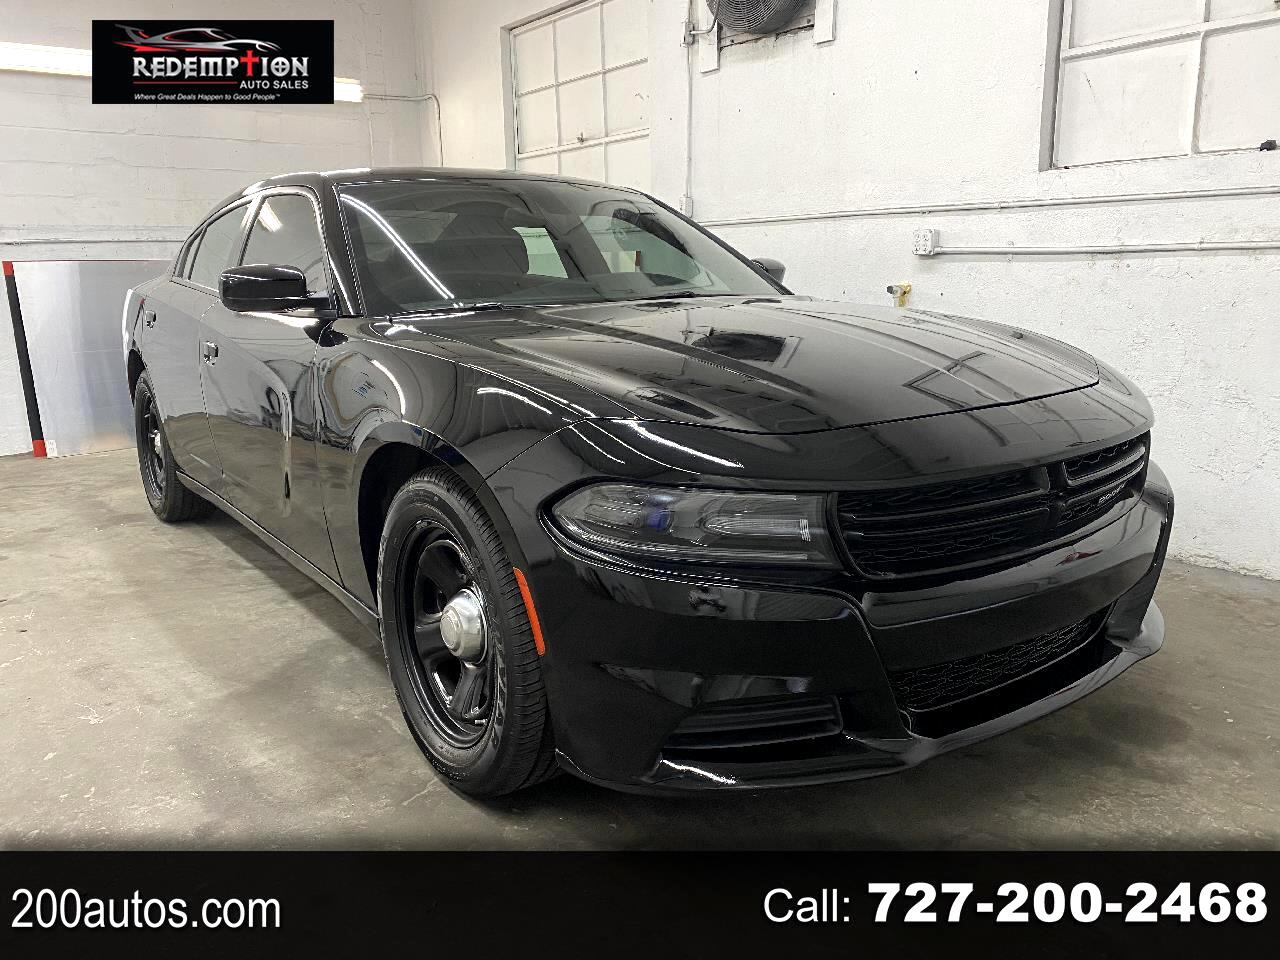 Dodge Charger Police 2019